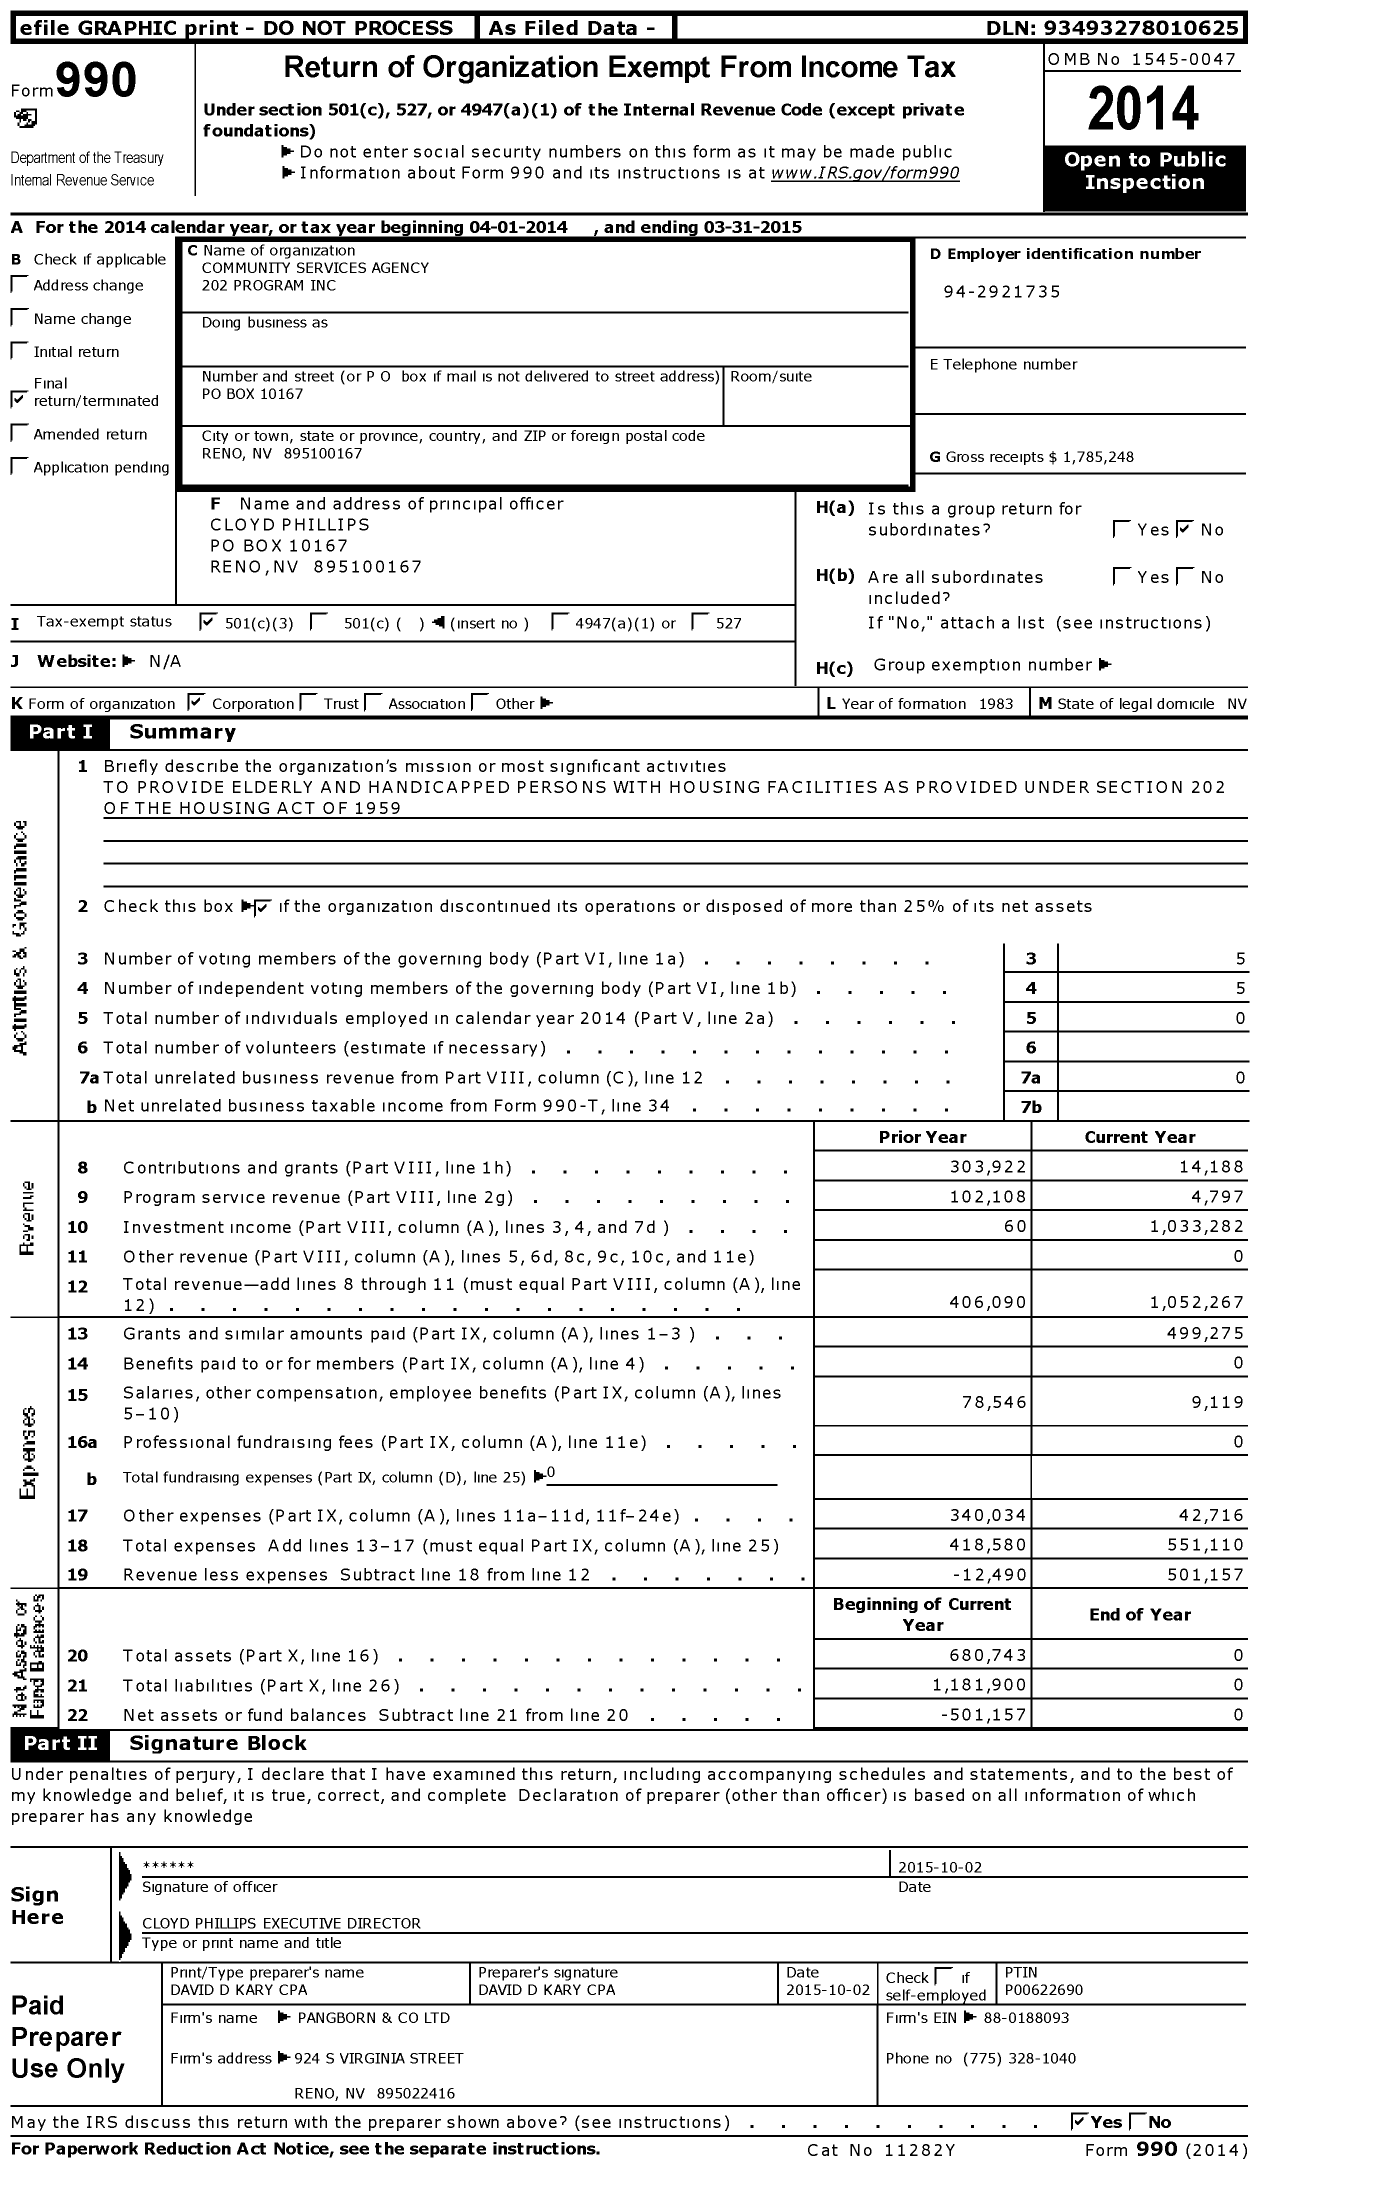 Image of first page of 2014 Form 990 for Community Services Agency 202 Program